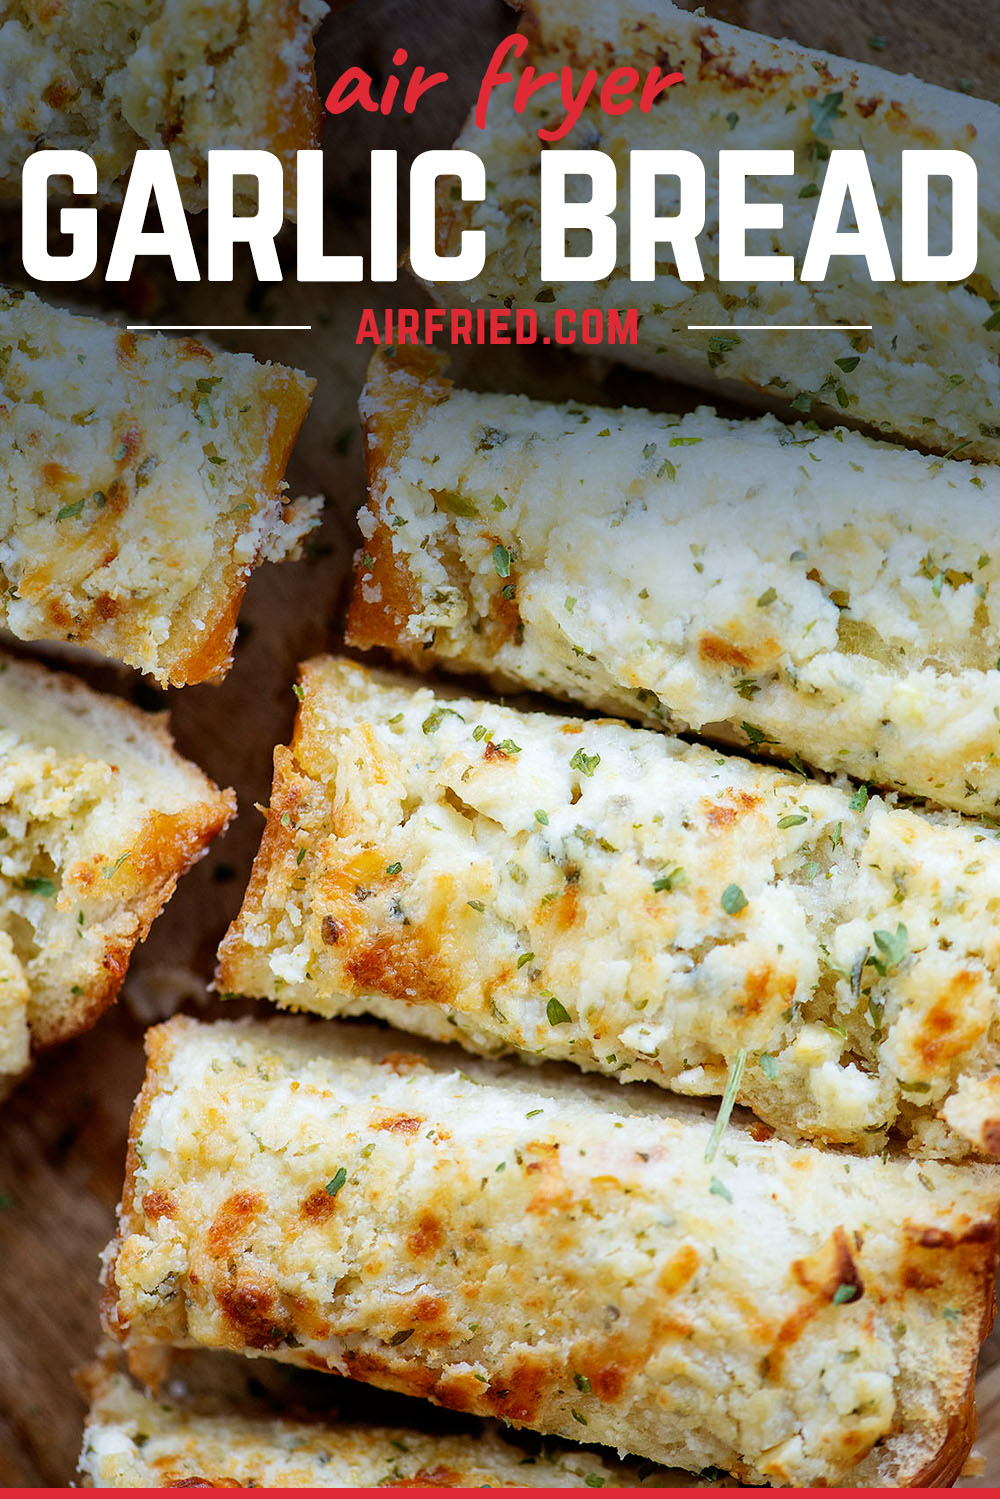 The air fryer garlic cheese bread has a small amount of cheese, but a big cheese taste! Simply amazing!